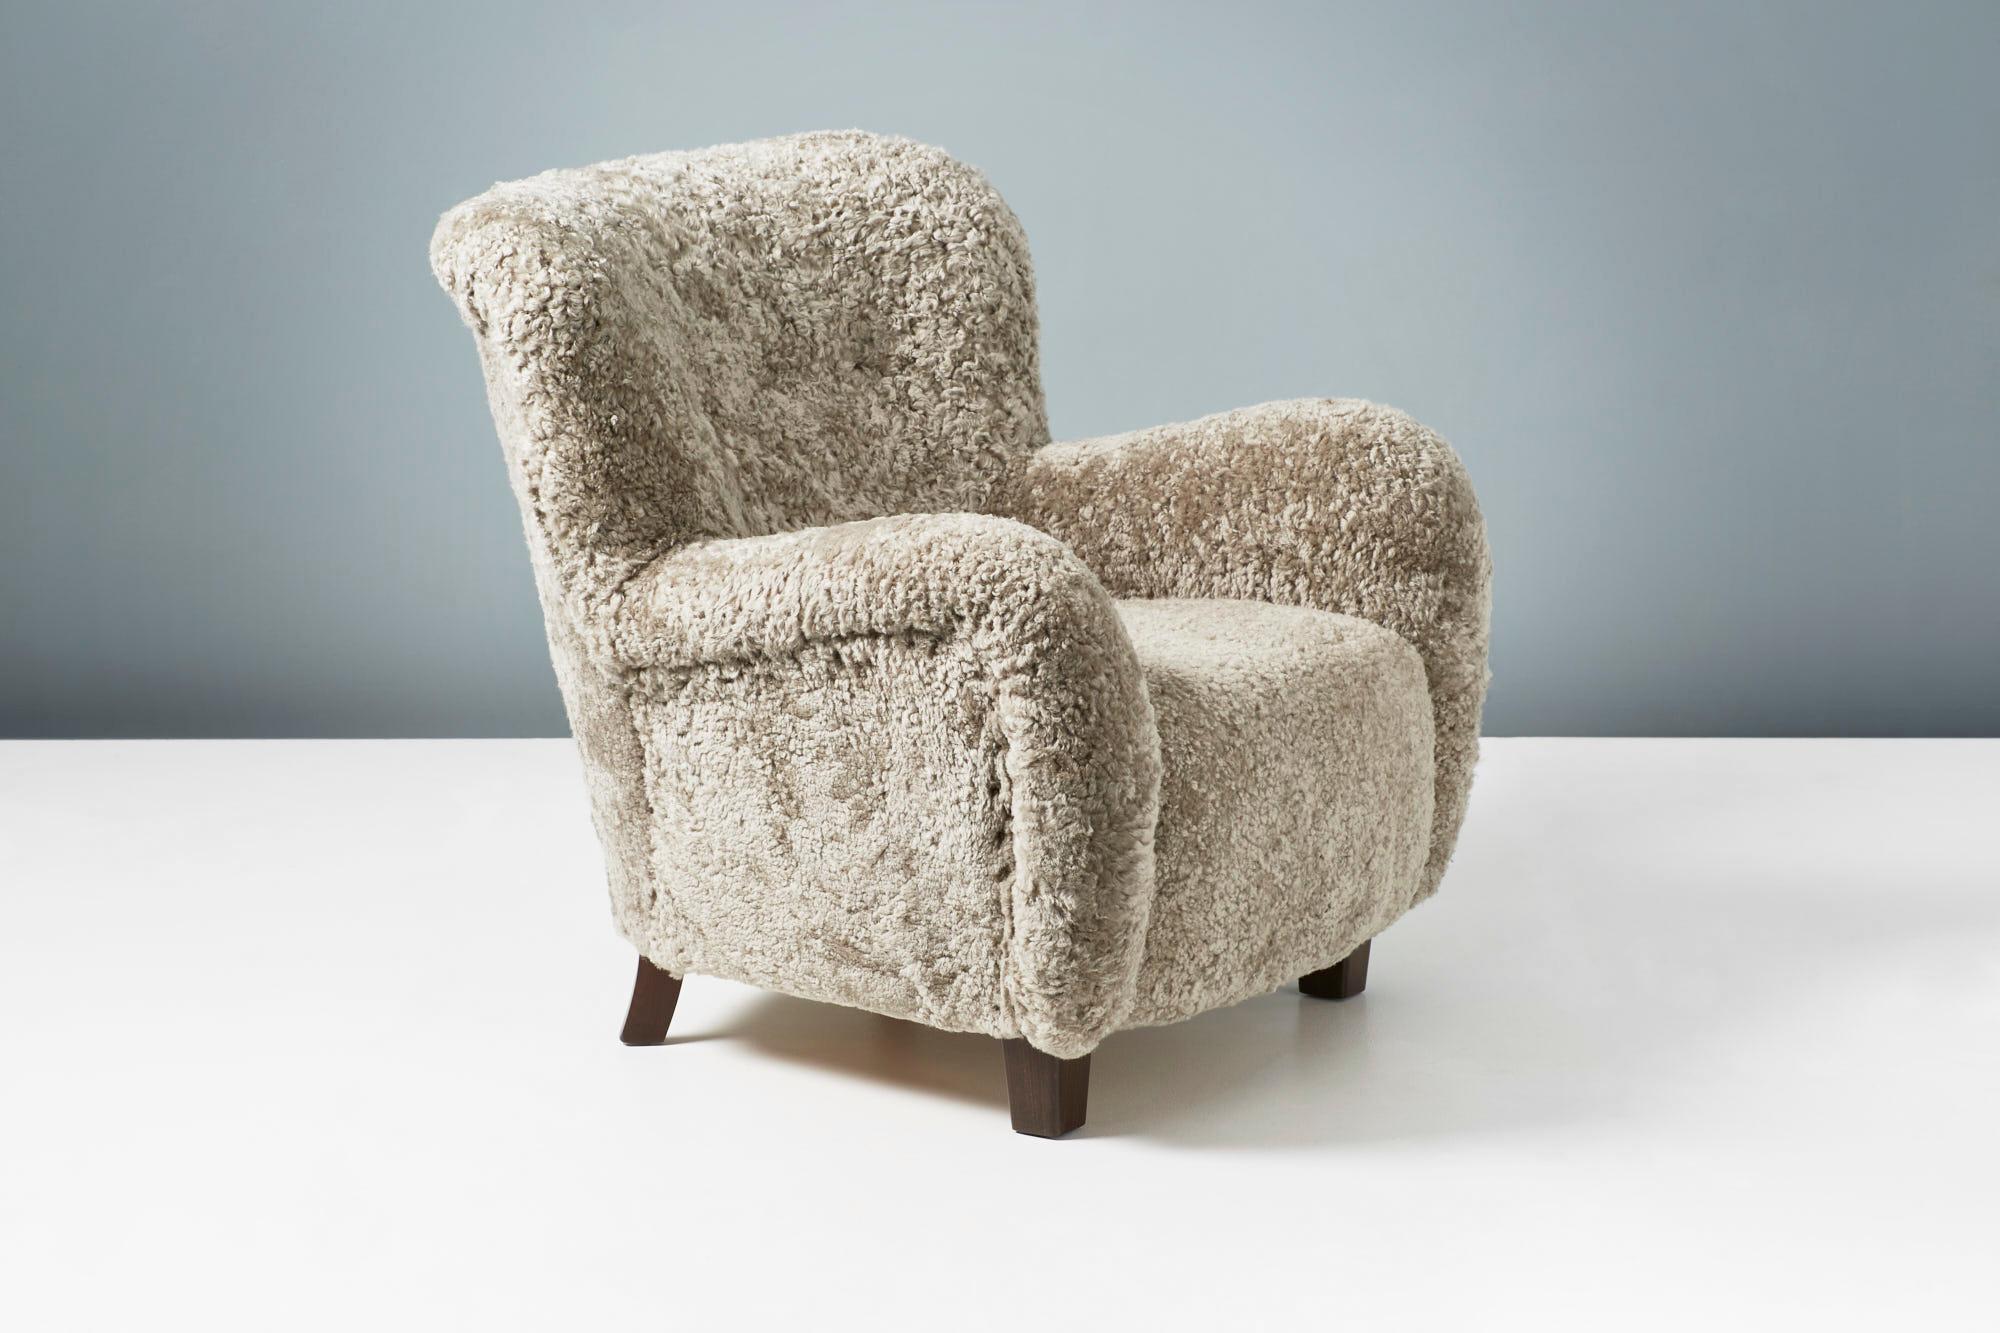 Danish Cabinetmaker
Lounge Chair, circa 1940s

A lounge chair in the manner of Fritz Hansen produced in Denmark in the 1940s. The chair has been completely reupholstered and covered in a warm grey Australian sheepskin. The feet are stained beech